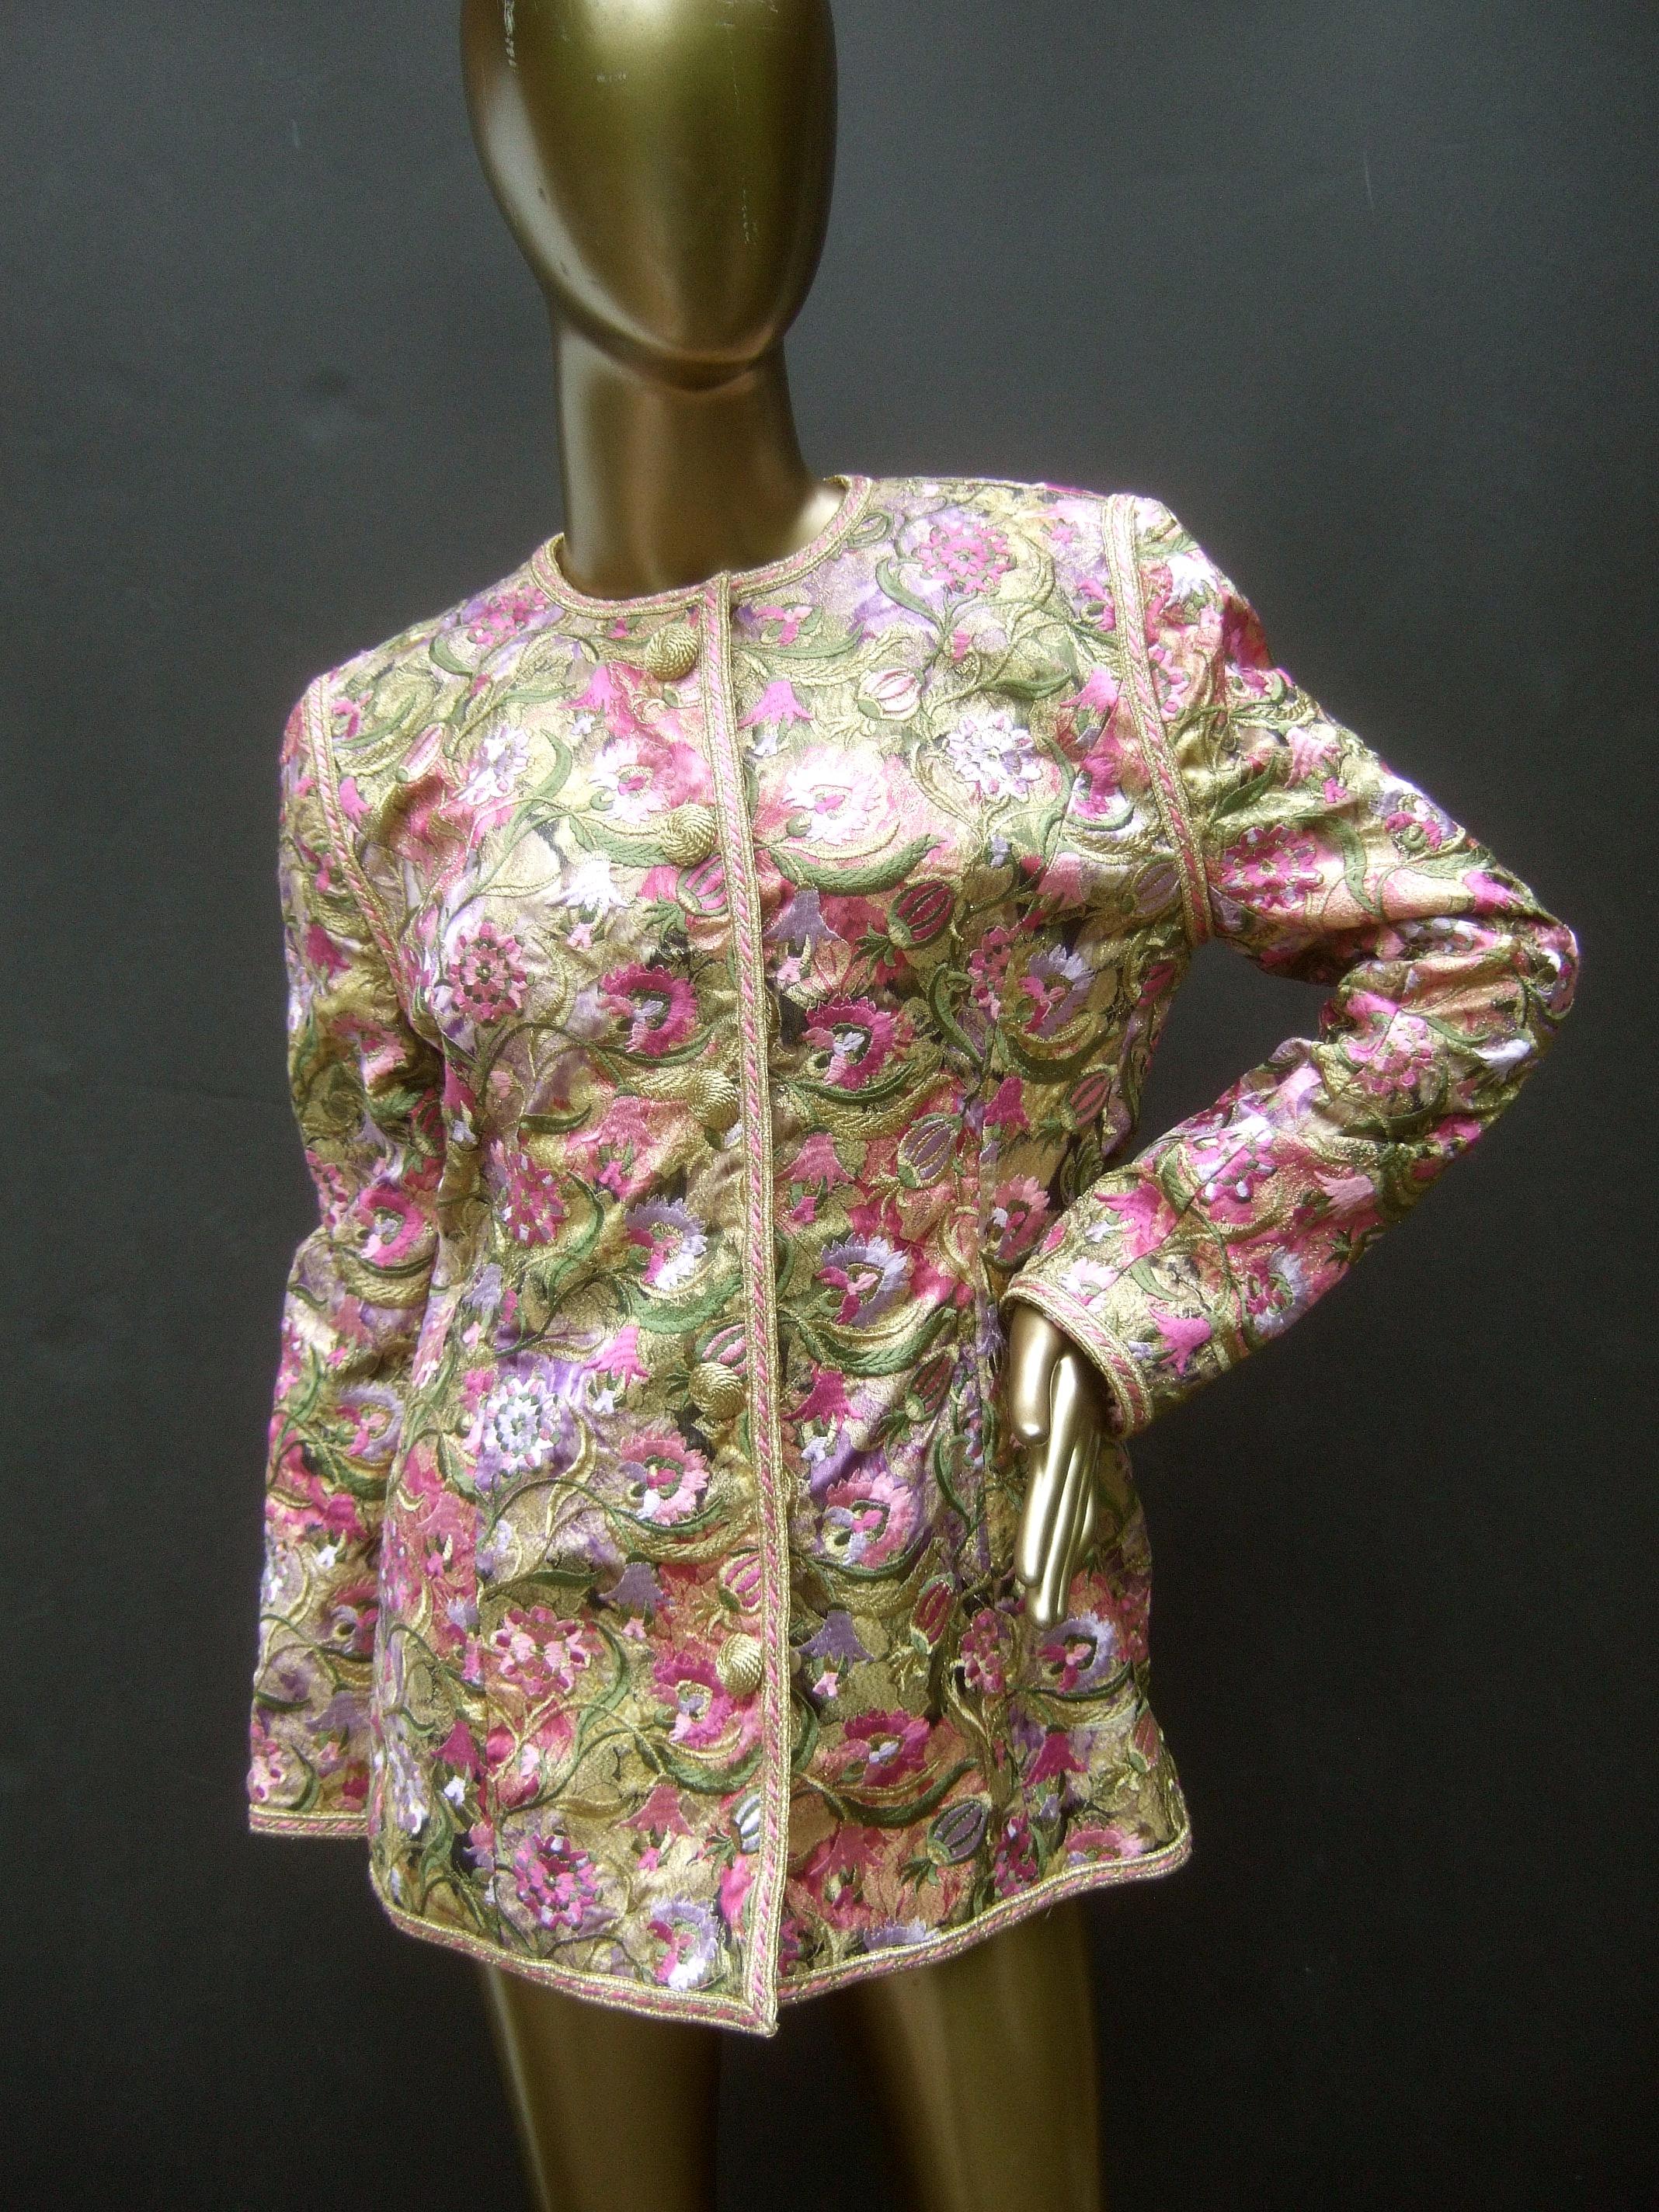 Saks Fifth Avenue Pastel Floral Embroidered Jacket by Victor Costa c 1980s 5